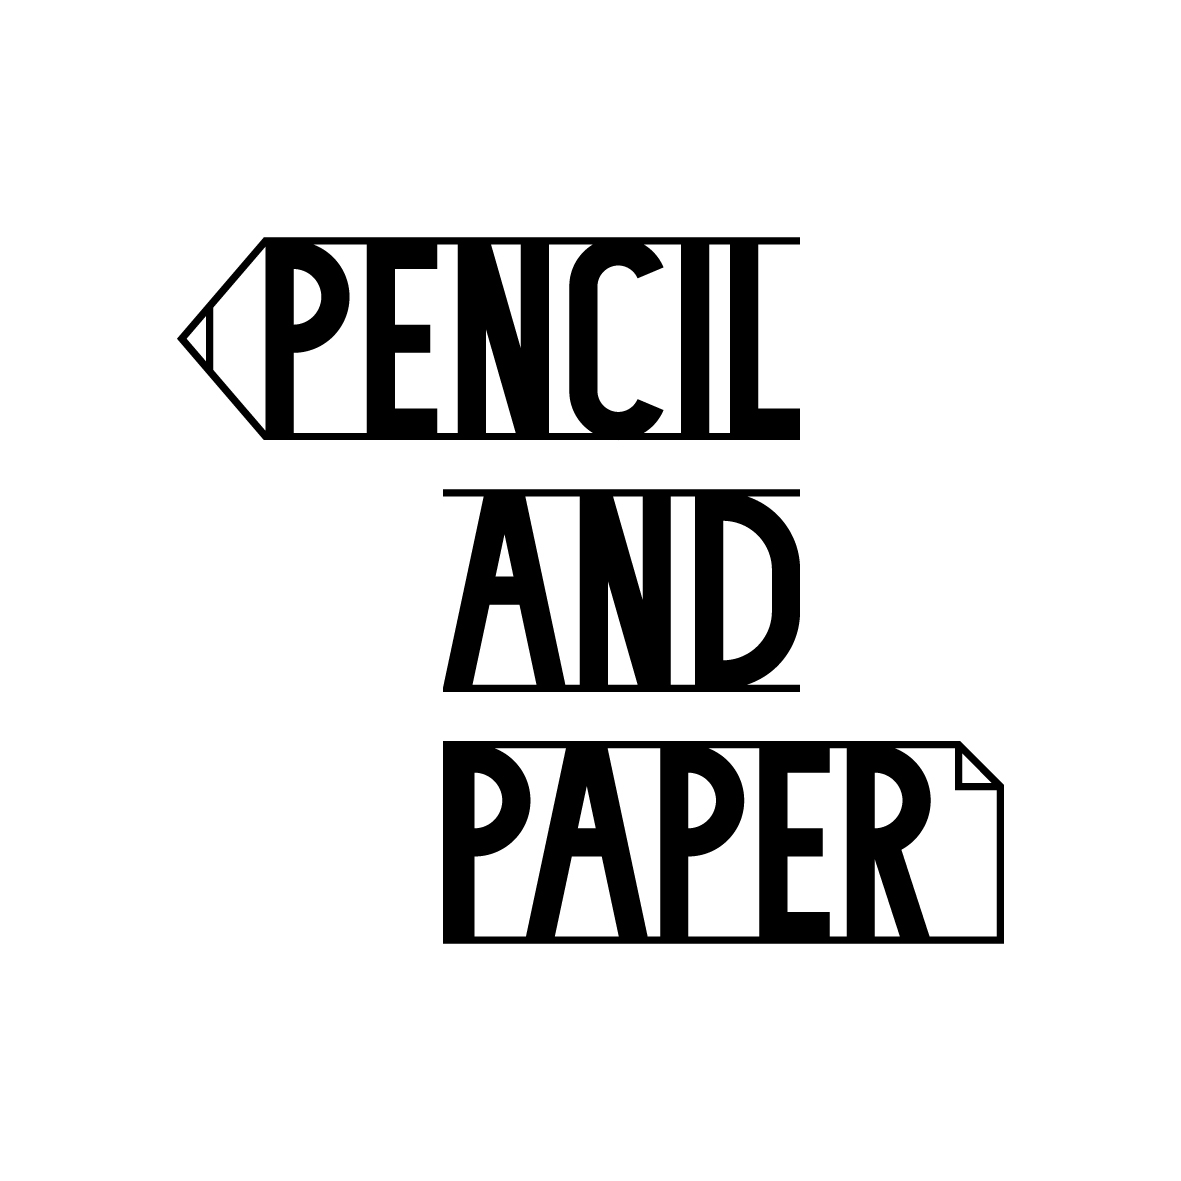 PENCIL AND PAPER